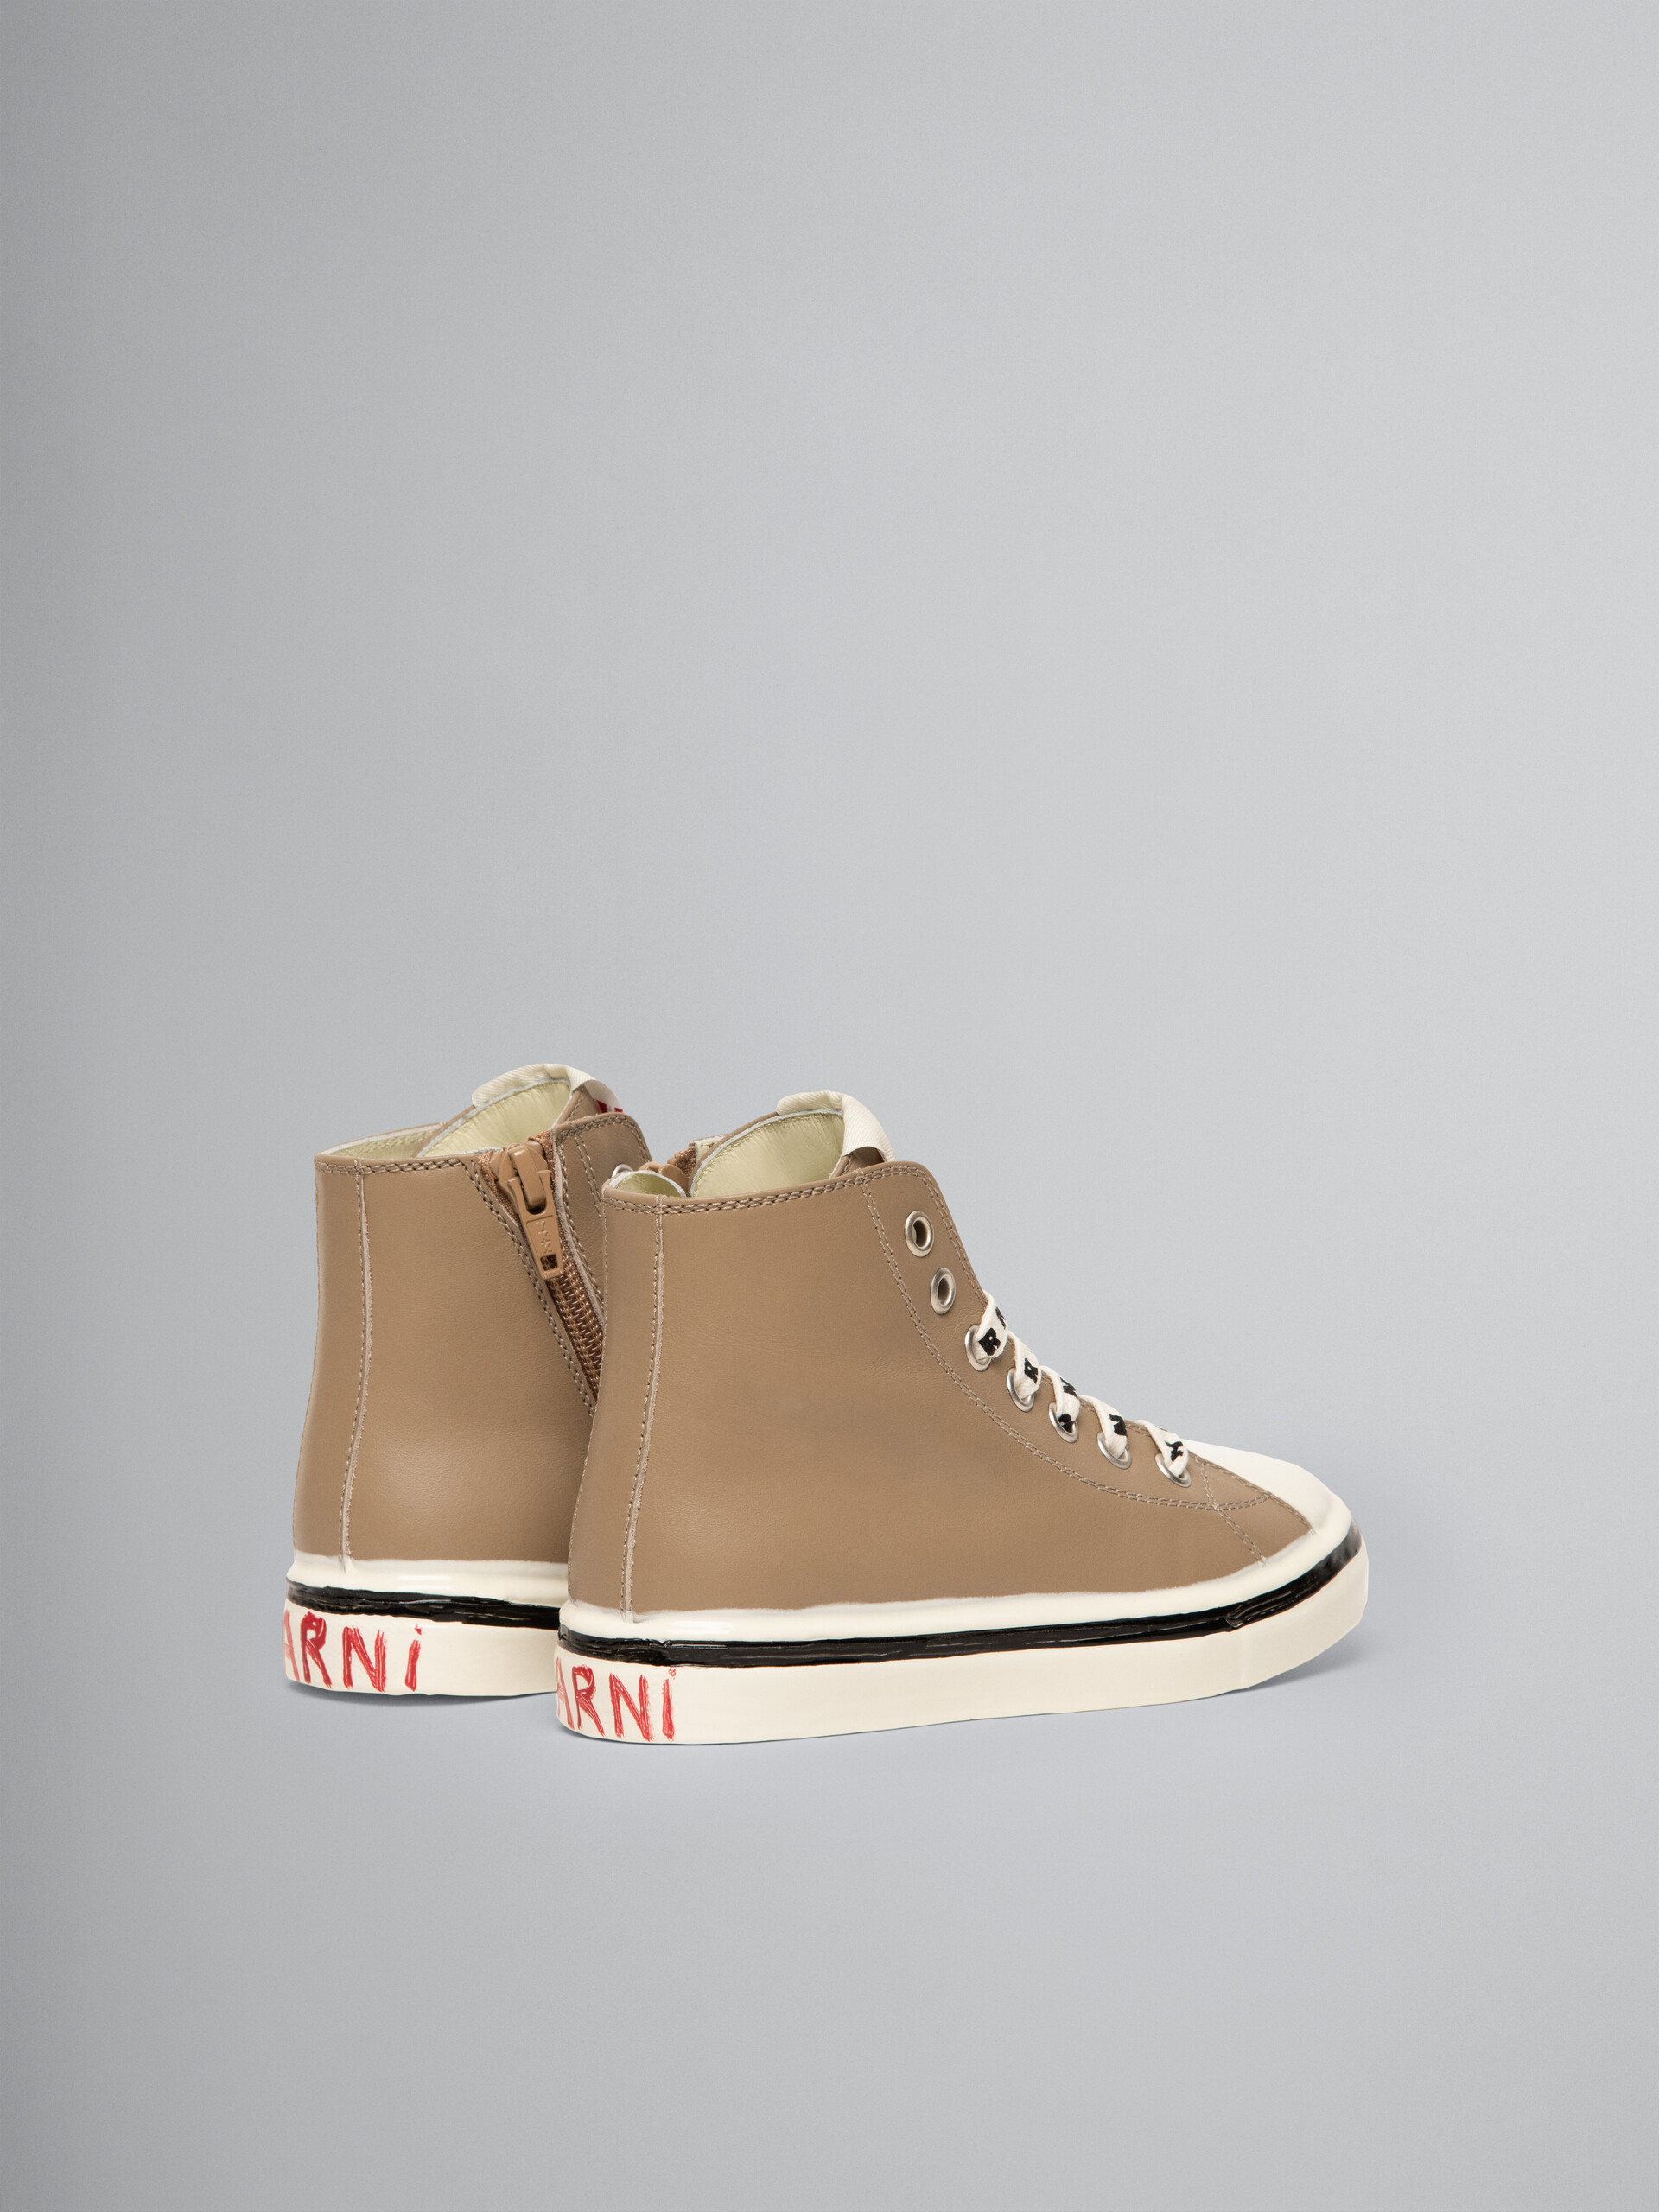 Brown leather sneaker - Other accessories - Image 3